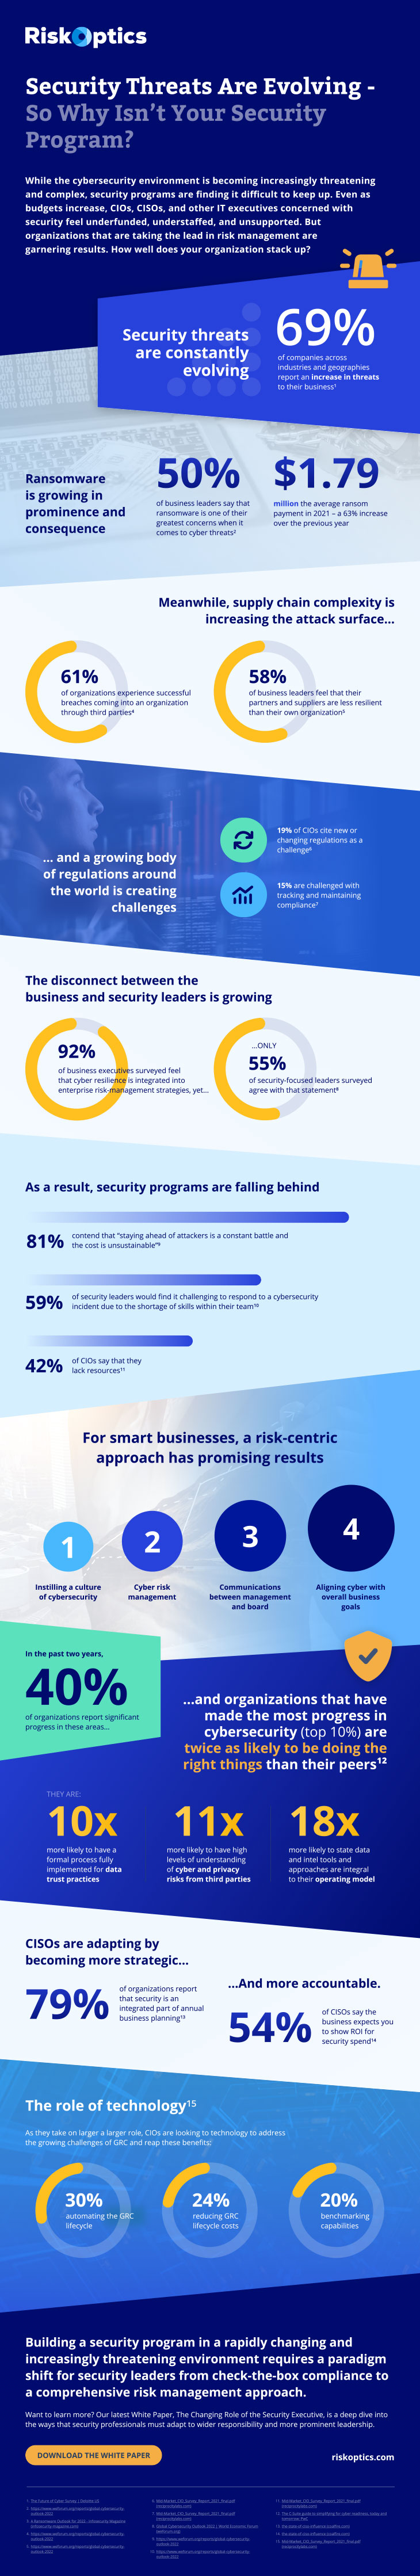 infographic - Security threats are evolving - so why isn't your security program?